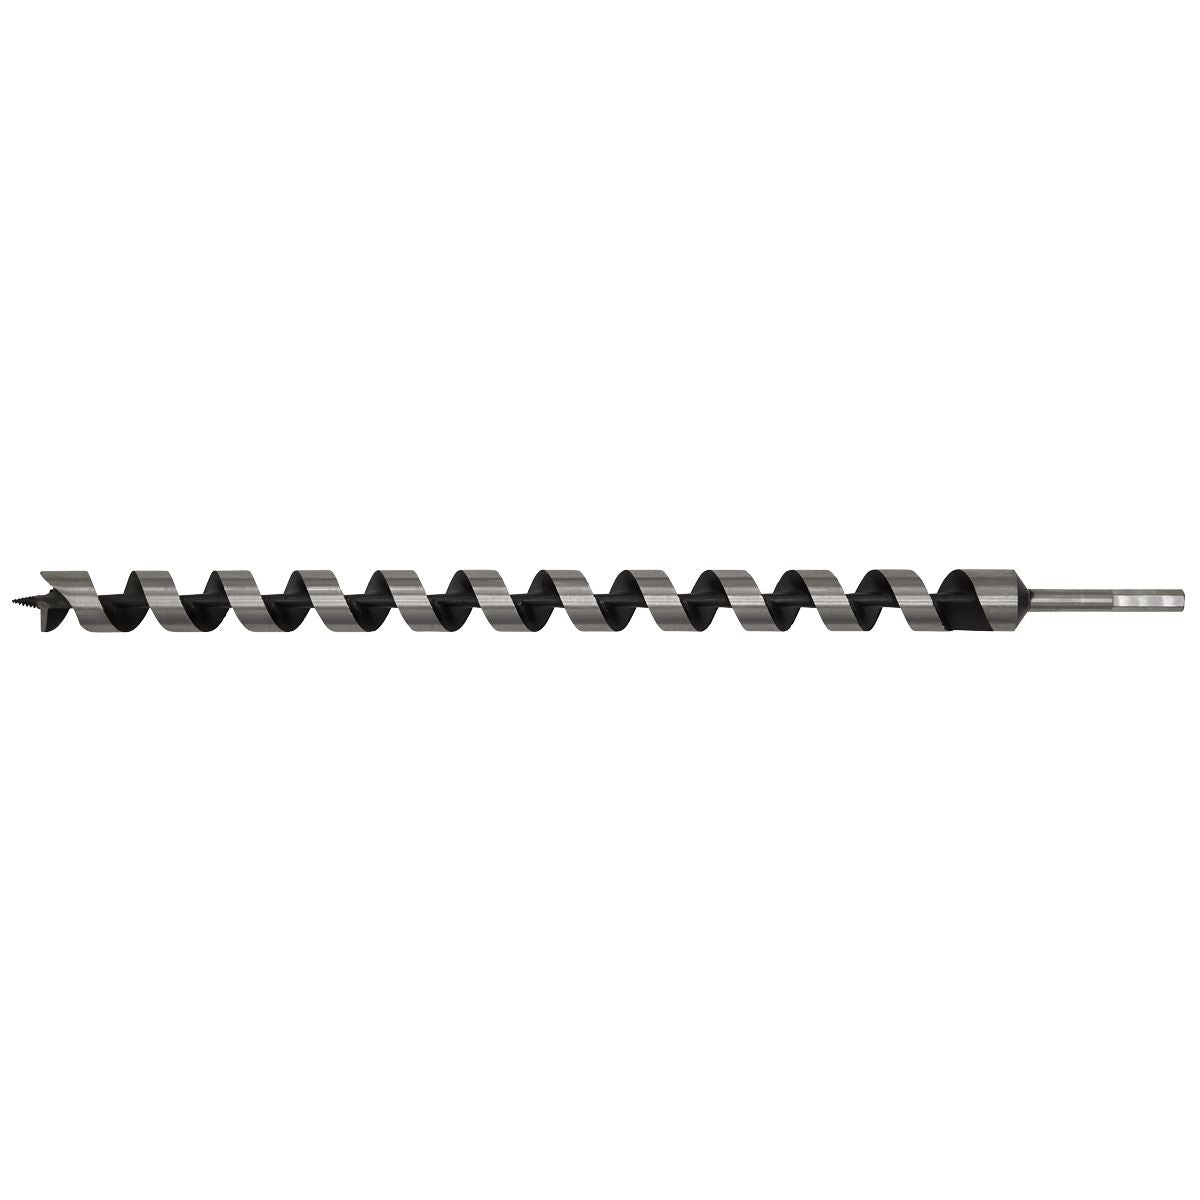 Worksafe by Sealey Auger Wood Drill Bit 32mm x 600mm